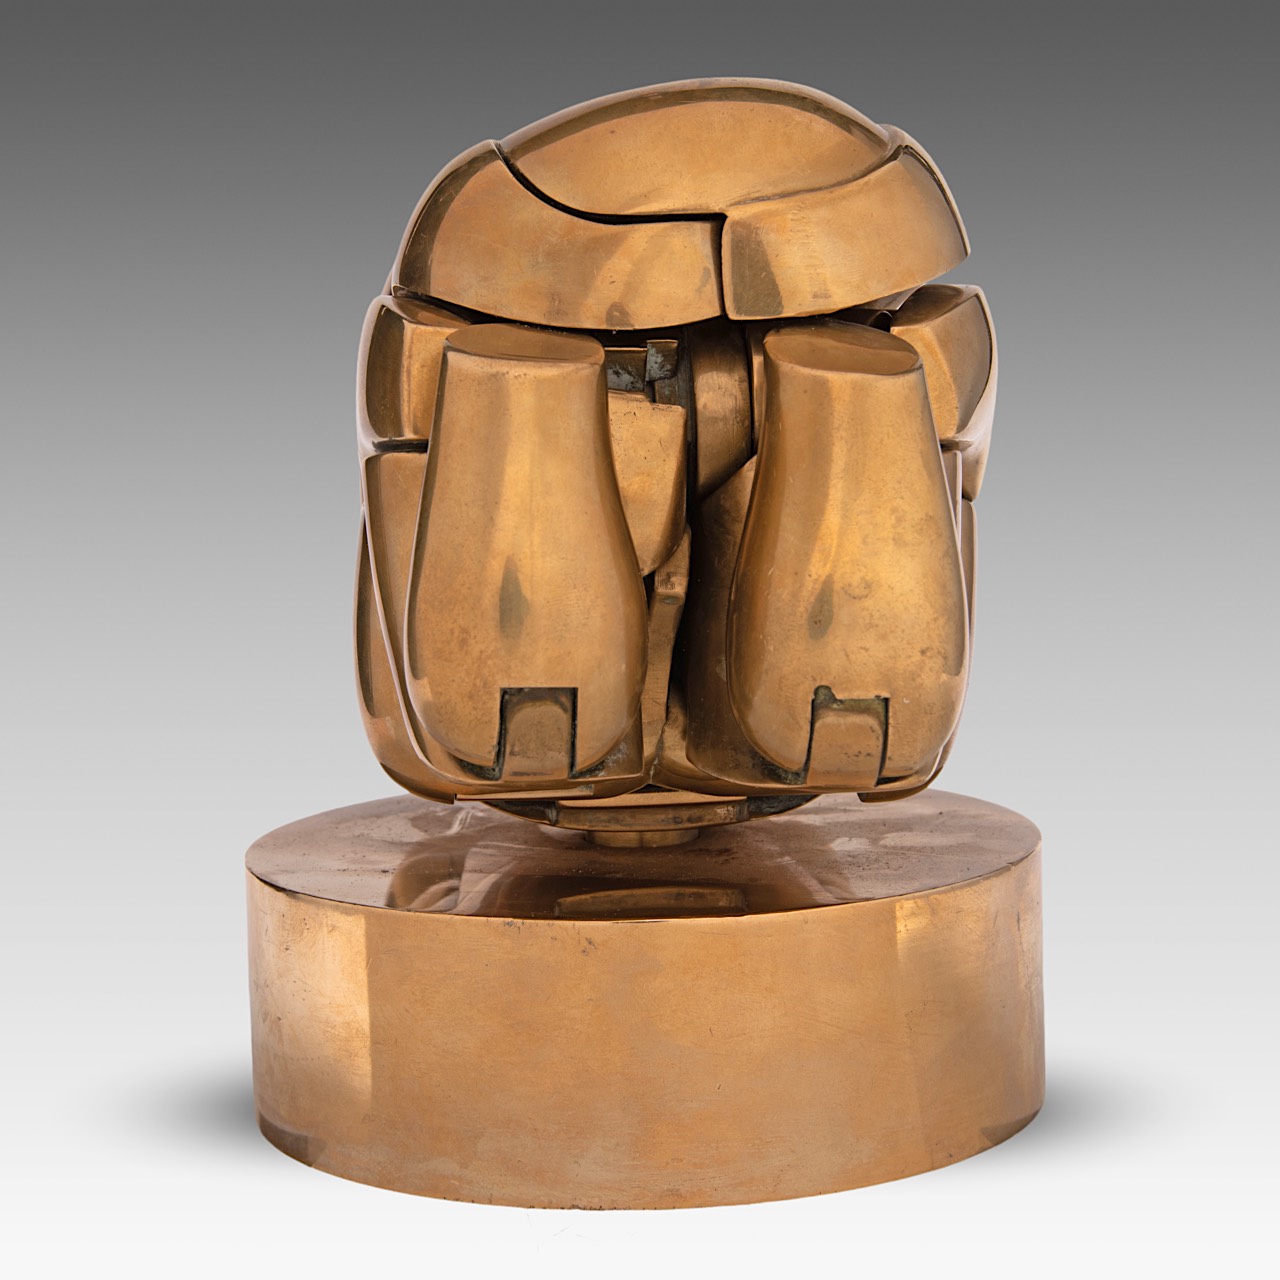 Miguel Berrocal (1933-2006), 'Romeo and Juliet', 1966, Ndeg1, polished brass, H 15 - W 20 cm - Image 6 of 12